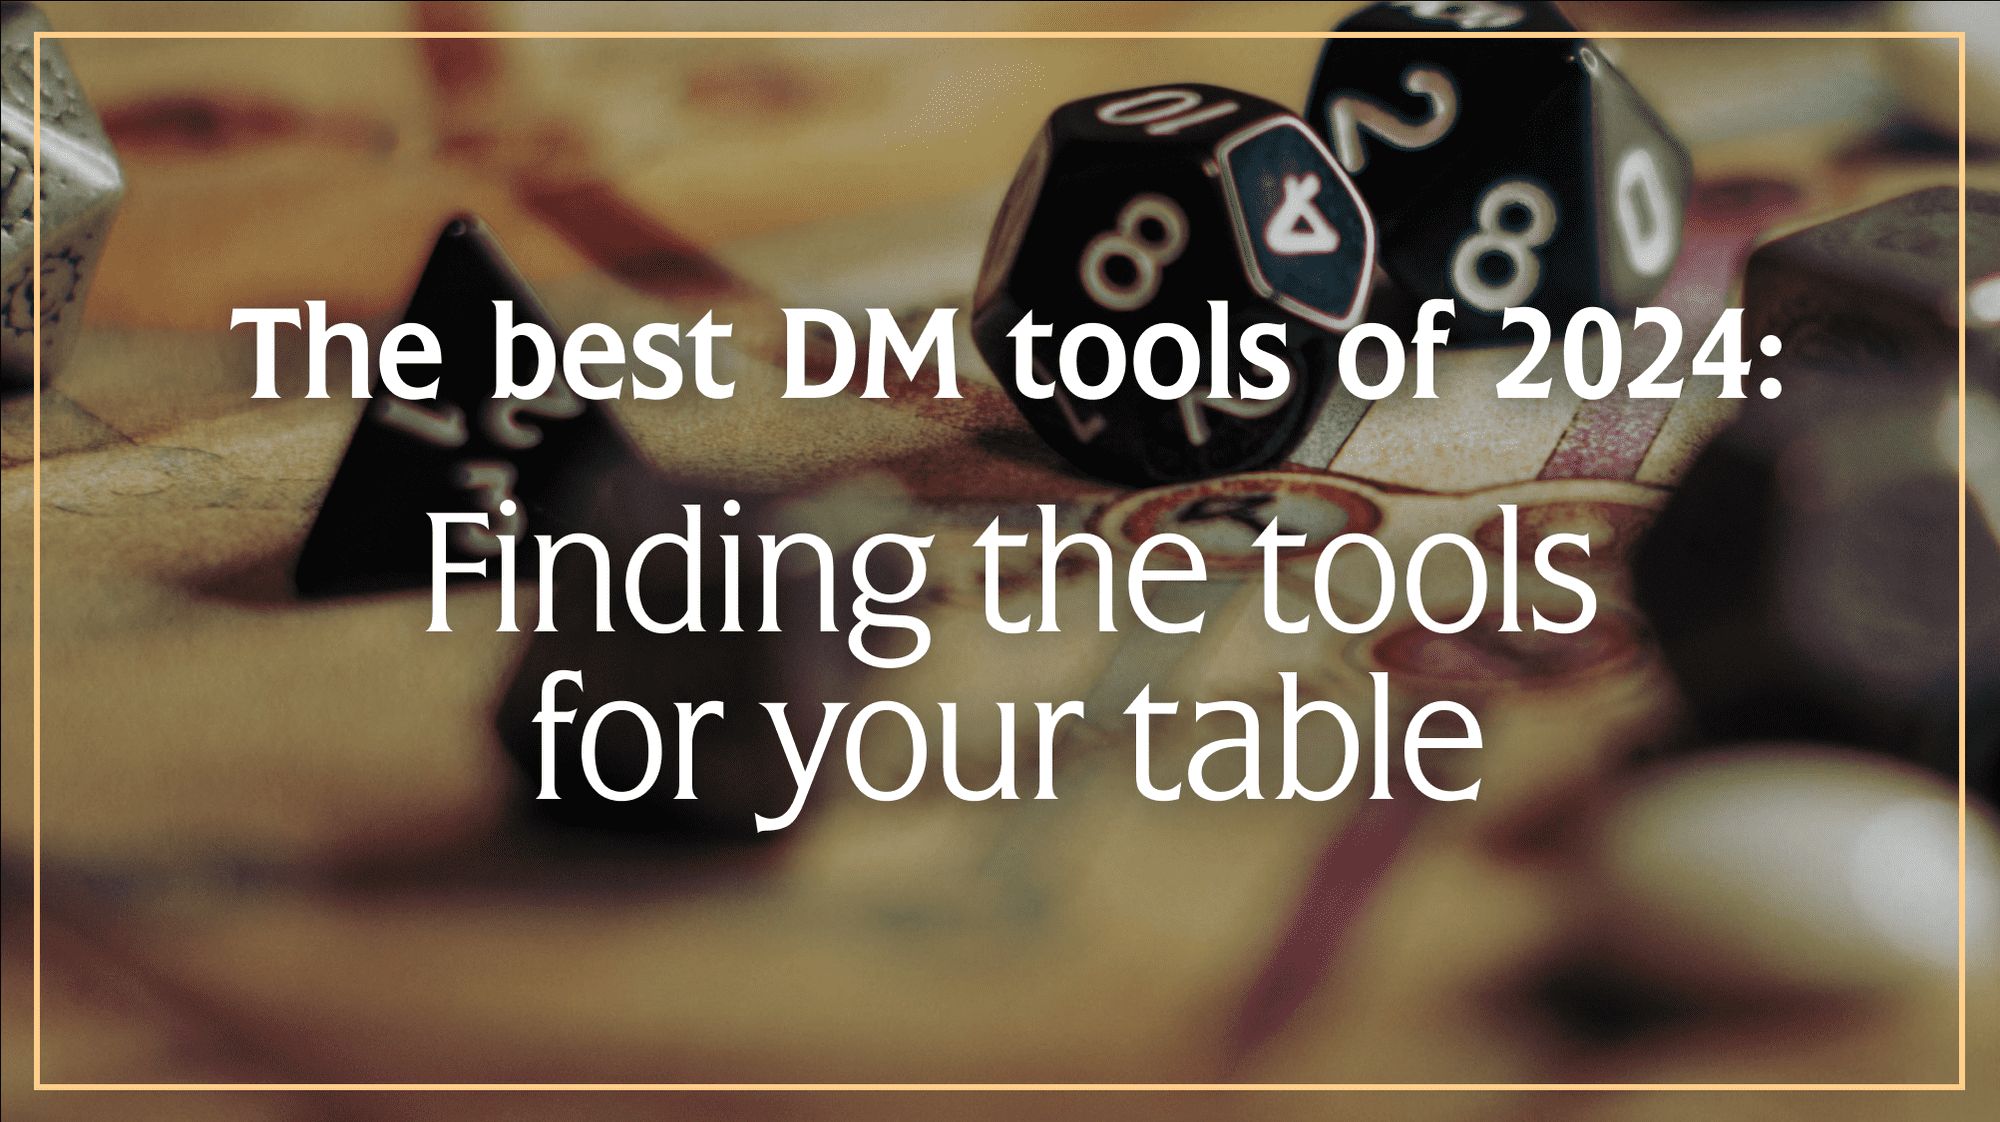 The best DM tools of 2024: Finding the tools for your table